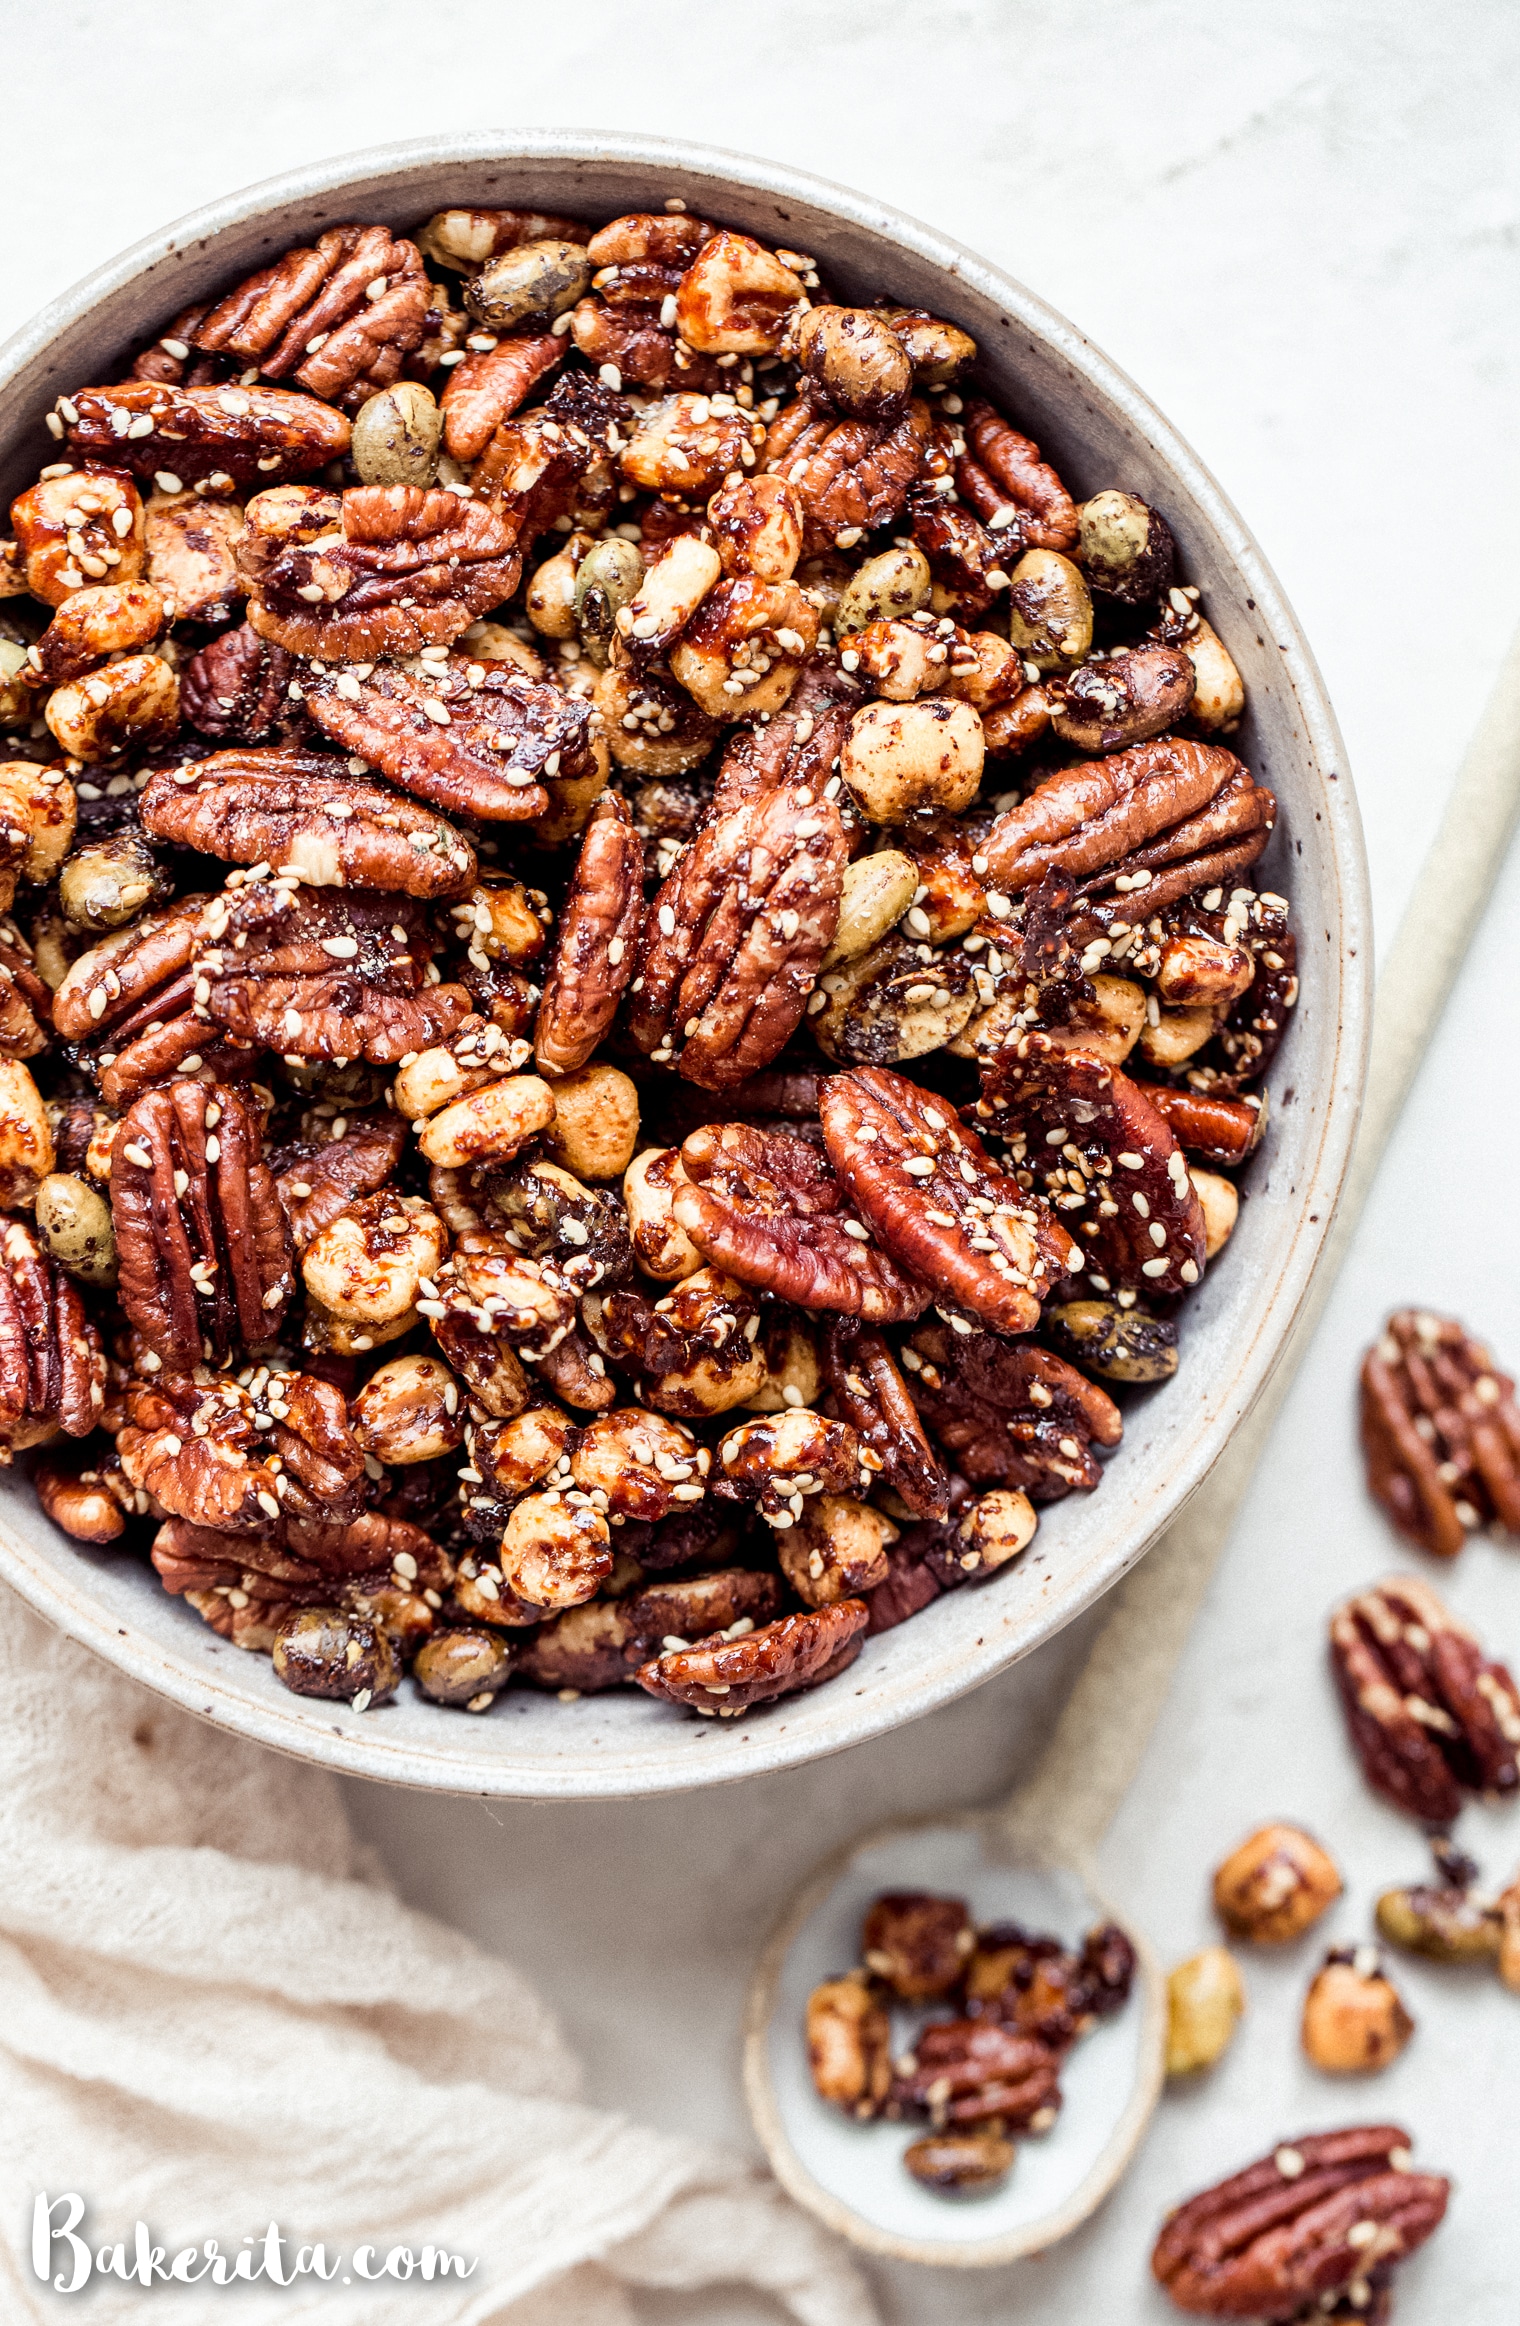 This Sesame Tamari Pecan Snack Mix is a deliciously crunchy snack that's bursting with sweet, savory, and umami flavors. It's gluten-free and vegan!